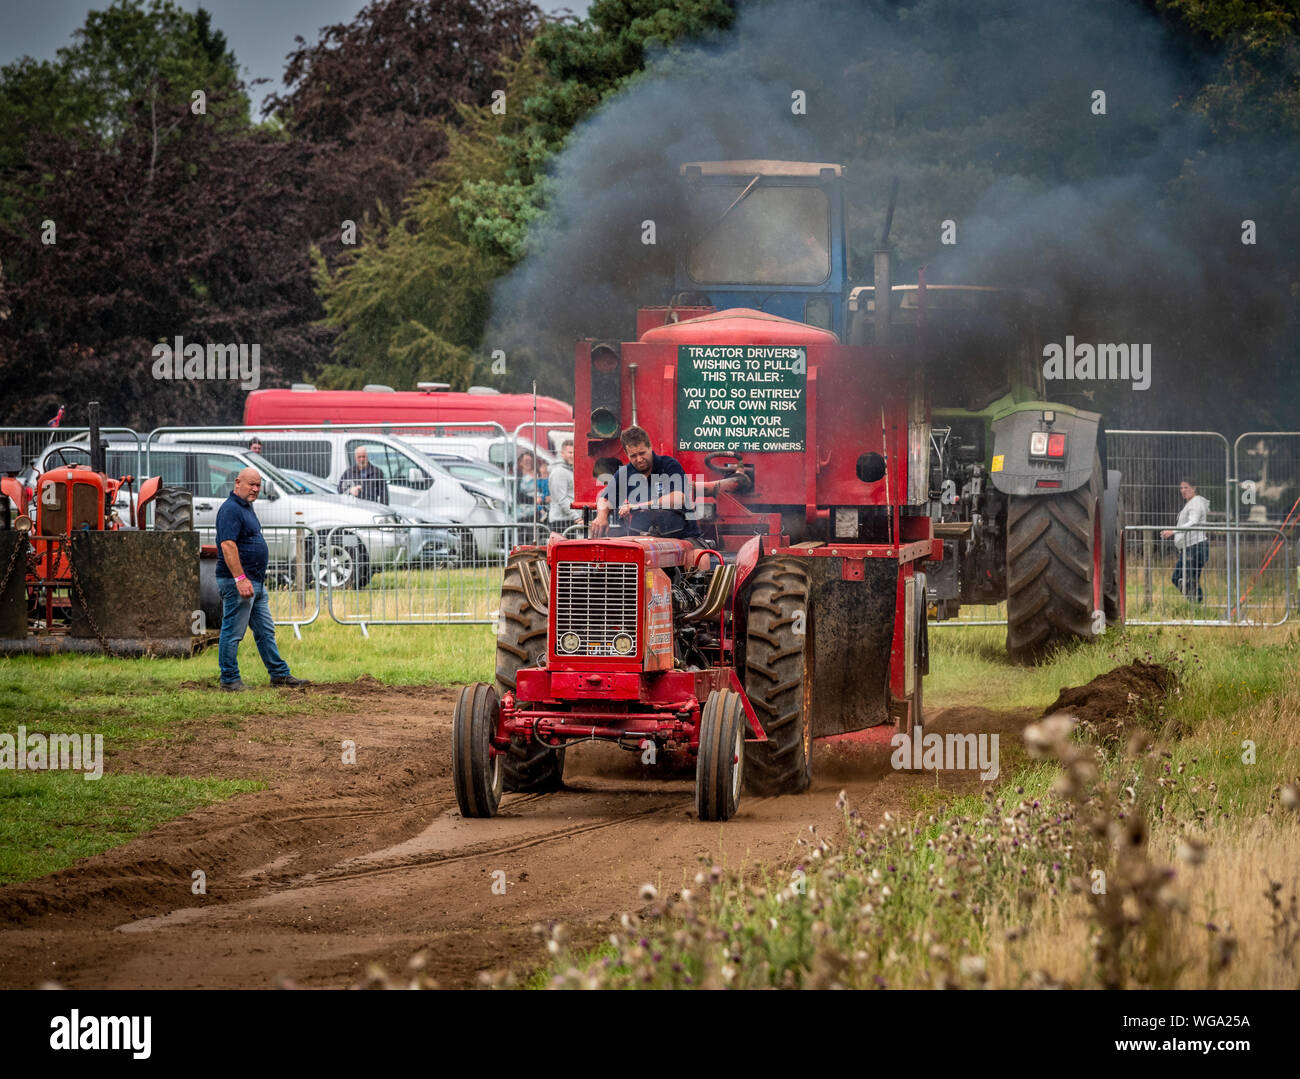 Tractor pulling challenge. Tractor dragging a metal sled along a track containing a box filled with weight. Stock Photo